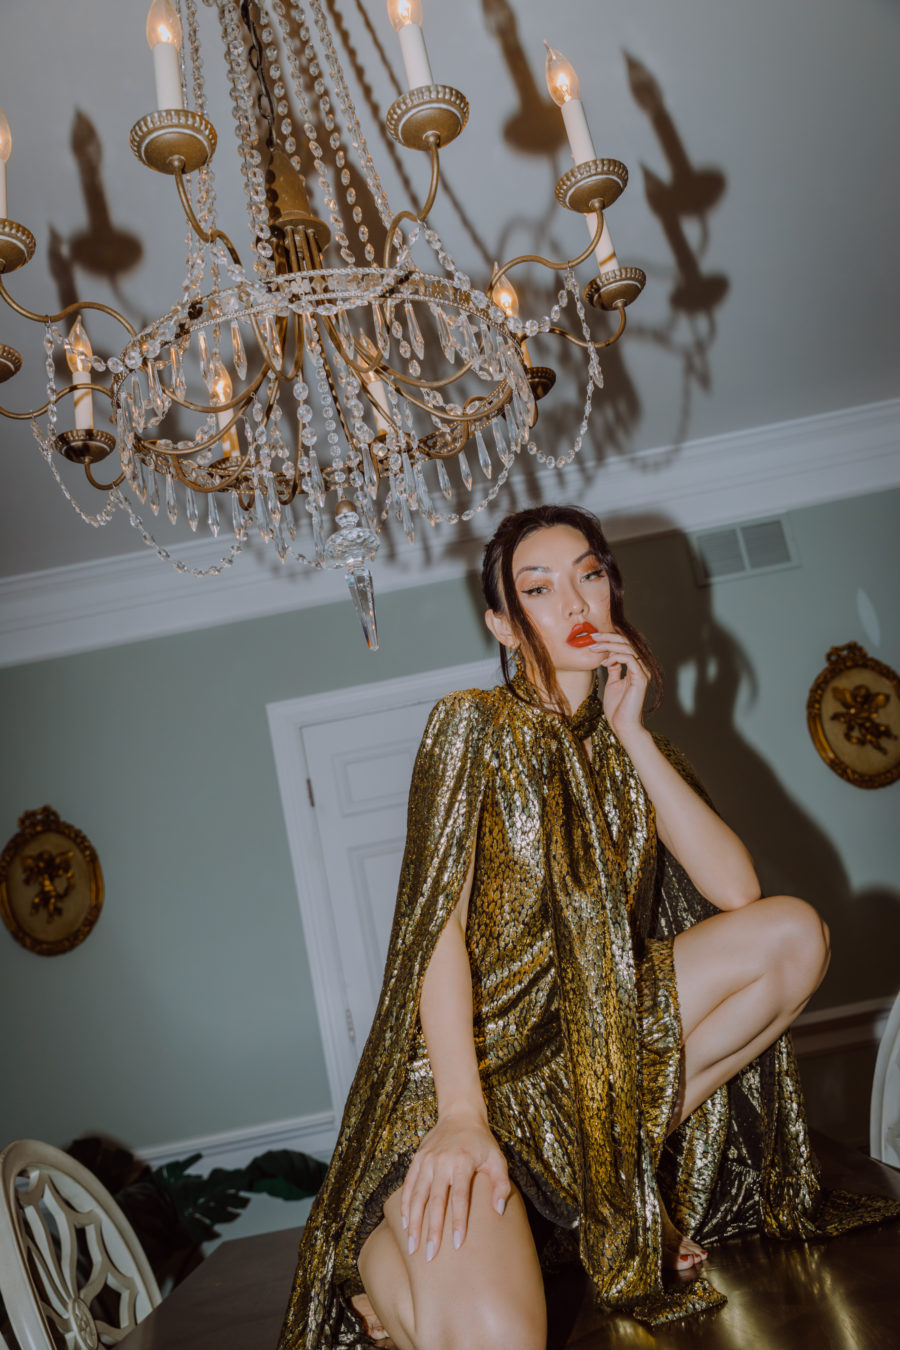 jessica wang wears a sparkly gold dress for new years eve // Jessica Wang - Notjessfashion.com